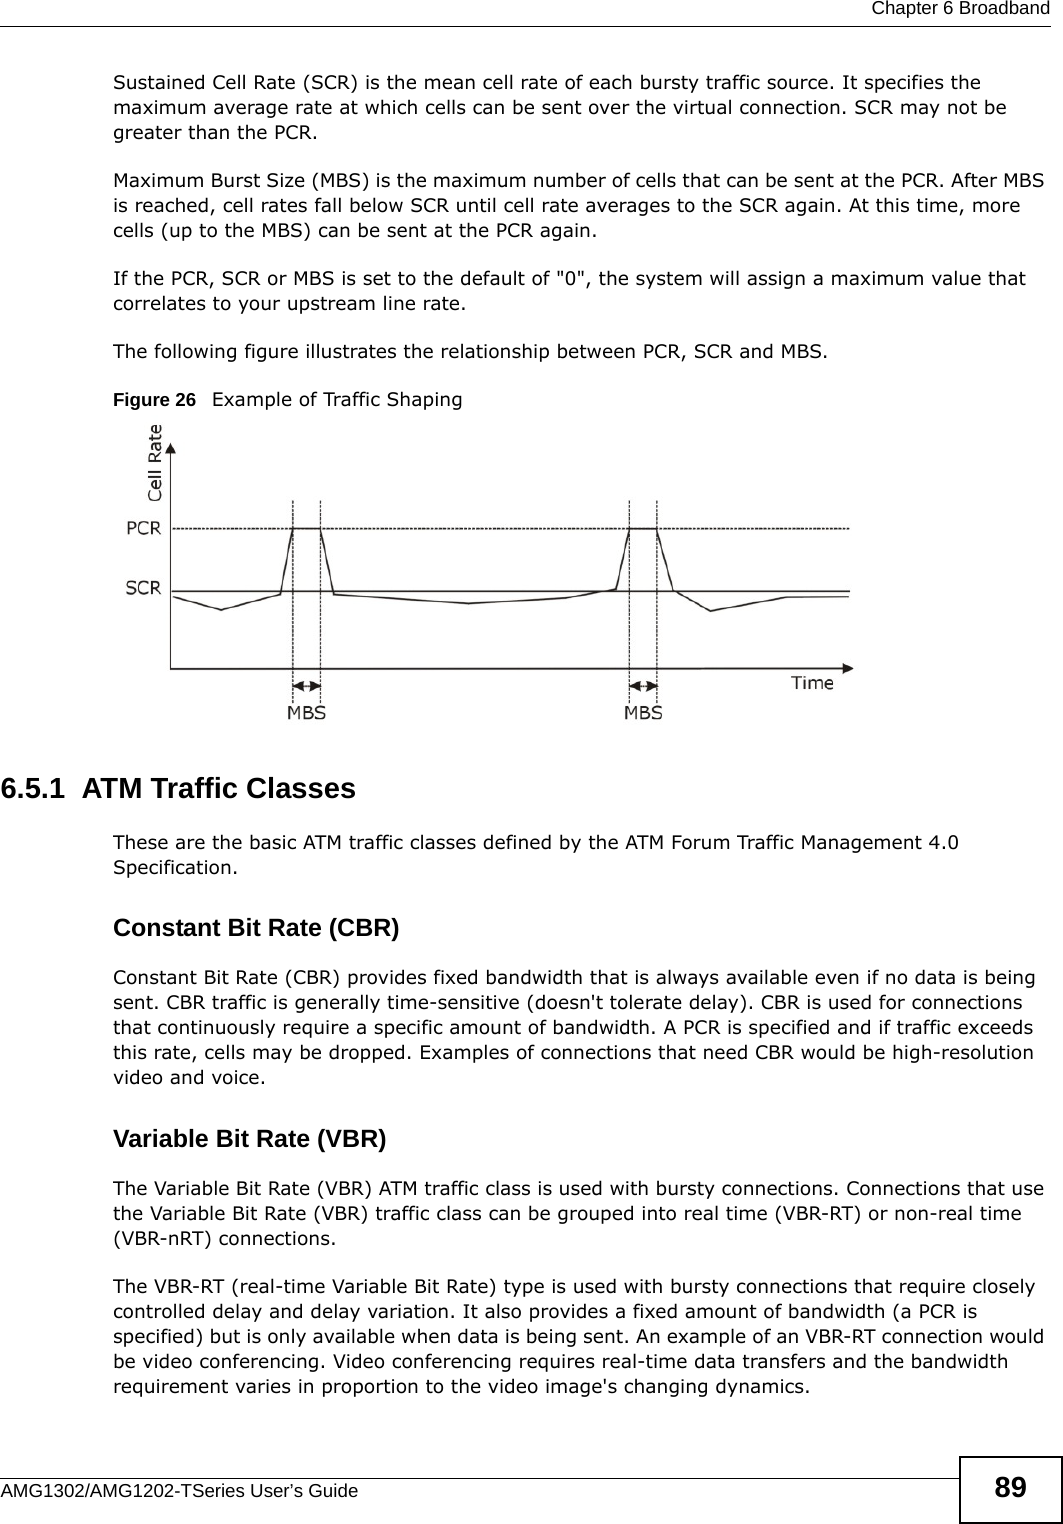  Chapter 6 BroadbandAMG1302/AMG1202-TSeries User’s Guide 89Sustained Cell Rate (SCR) is the mean cell rate of each bursty traffic source. It specifies the maximum average rate at which cells can be sent over the virtual connection. SCR may not be greater than the PCR.Maximum Burst Size (MBS) is the maximum number of cells that can be sent at the PCR. After MBS is reached, cell rates fall below SCR until cell rate averages to the SCR again. At this time, more cells (up to the MBS) can be sent at the PCR again.If the PCR, SCR or MBS is set to the default of &quot;0&quot;, the system will assign a maximum value that correlates to your upstream line rate. The following figure illustrates the relationship between PCR, SCR and MBS. Figure 26   Example of Traffic Shaping6.5.1  ATM Traffic ClassesThese are the basic ATM traffic classes defined by the ATM Forum Traffic Management 4.0 Specification. Constant Bit Rate (CBR)Constant Bit Rate (CBR) provides fixed bandwidth that is always available even if no data is being sent. CBR traffic is generally time-sensitive (doesn&apos;t tolerate delay). CBR is used for connections that continuously require a specific amount of bandwidth. A PCR is specified and if traffic exceeds this rate, cells may be dropped. Examples of connections that need CBR would be high-resolution video and voice.Variable Bit Rate (VBR) The Variable Bit Rate (VBR) ATM traffic class is used with bursty connections. Connections that use the Variable Bit Rate (VBR) traffic class can be grouped into real time (VBR-RT) or non-real time (VBR-nRT) connections. The VBR-RT (real-time Variable Bit Rate) type is used with bursty connections that require closely controlled delay and delay variation. It also provides a fixed amount of bandwidth (a PCR is specified) but is only available when data is being sent. An example of an VBR-RT connection would be video conferencing. Video conferencing requires real-time data transfers and the bandwidth requirement varies in proportion to the video image&apos;s changing dynamics. 